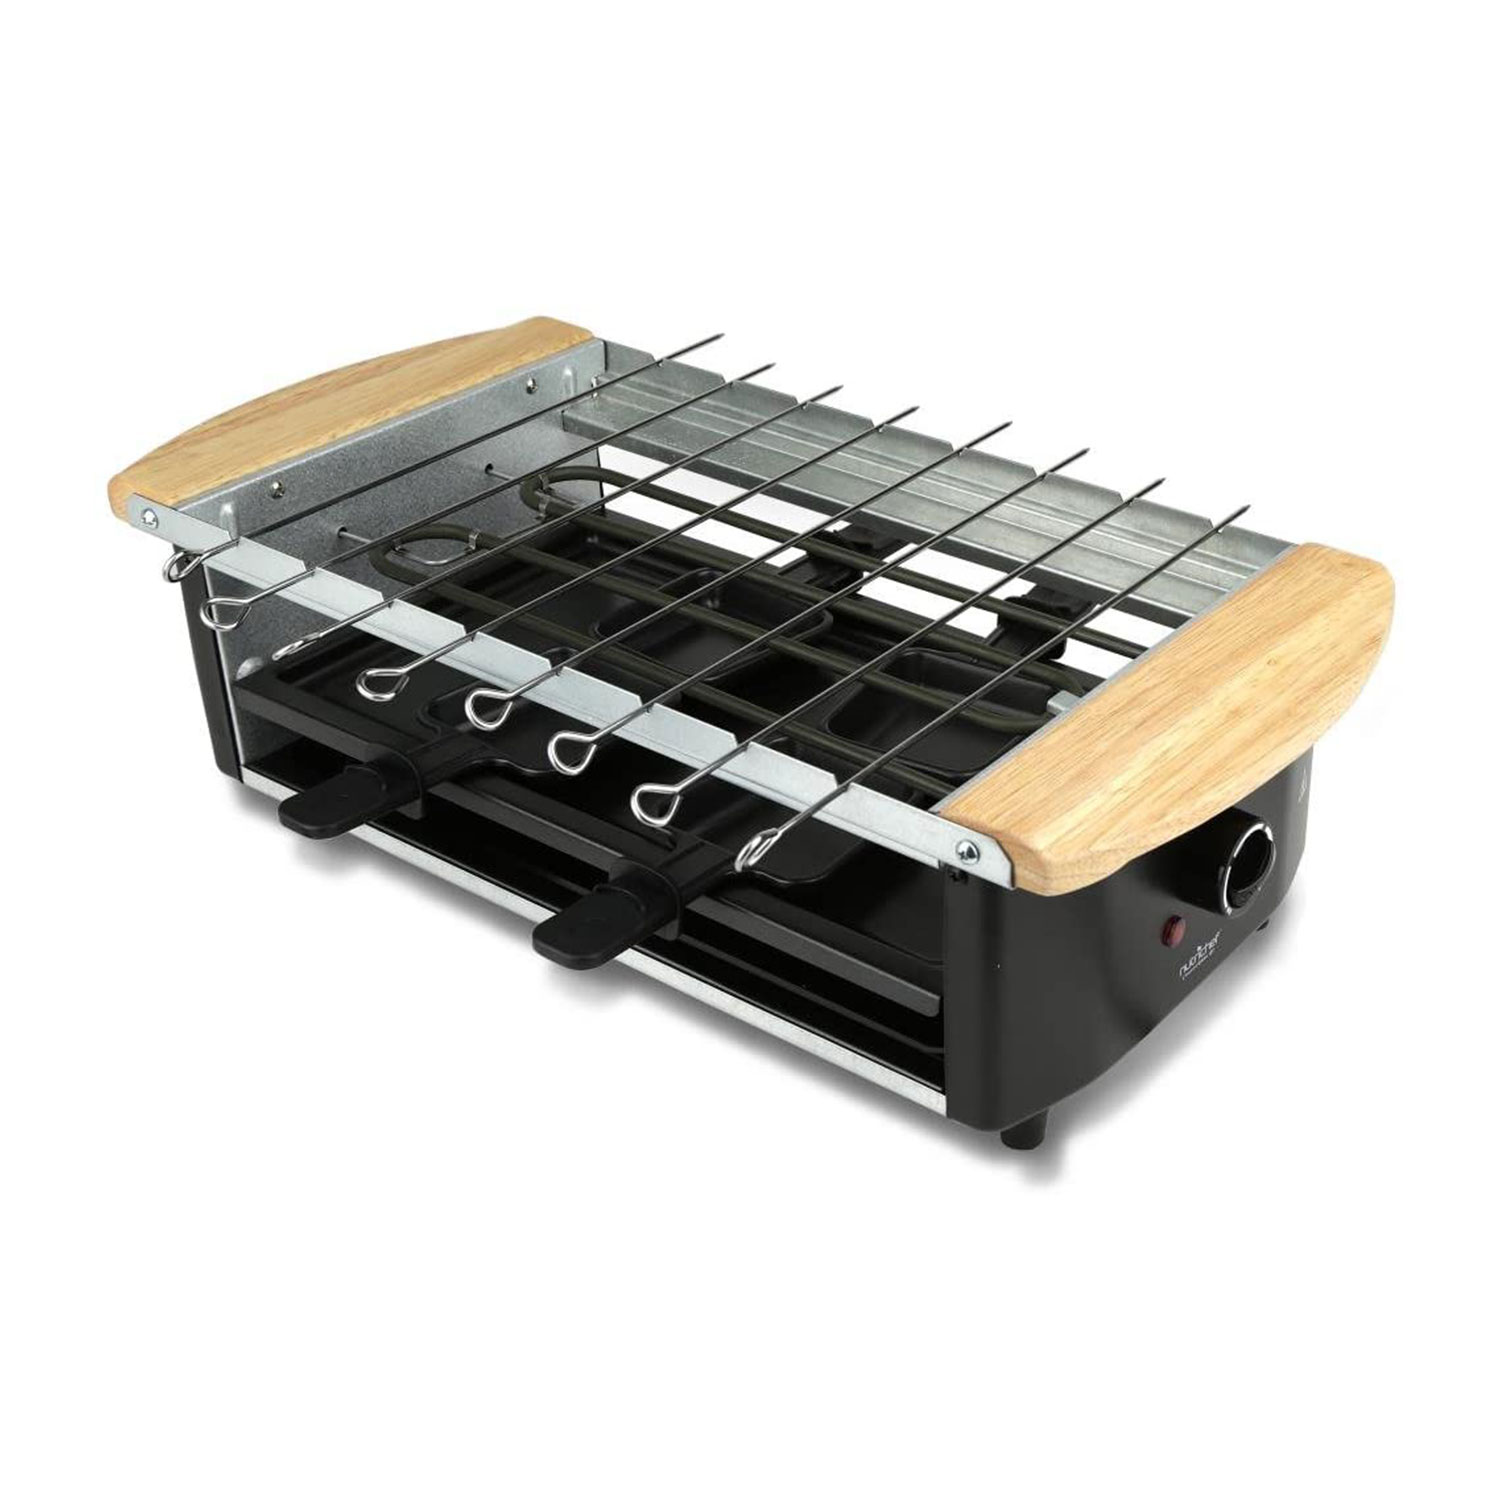 NutriChef Raclette 1200W 2 Tier Stone Plate and Metal Grill Countertop - image 2 of 5